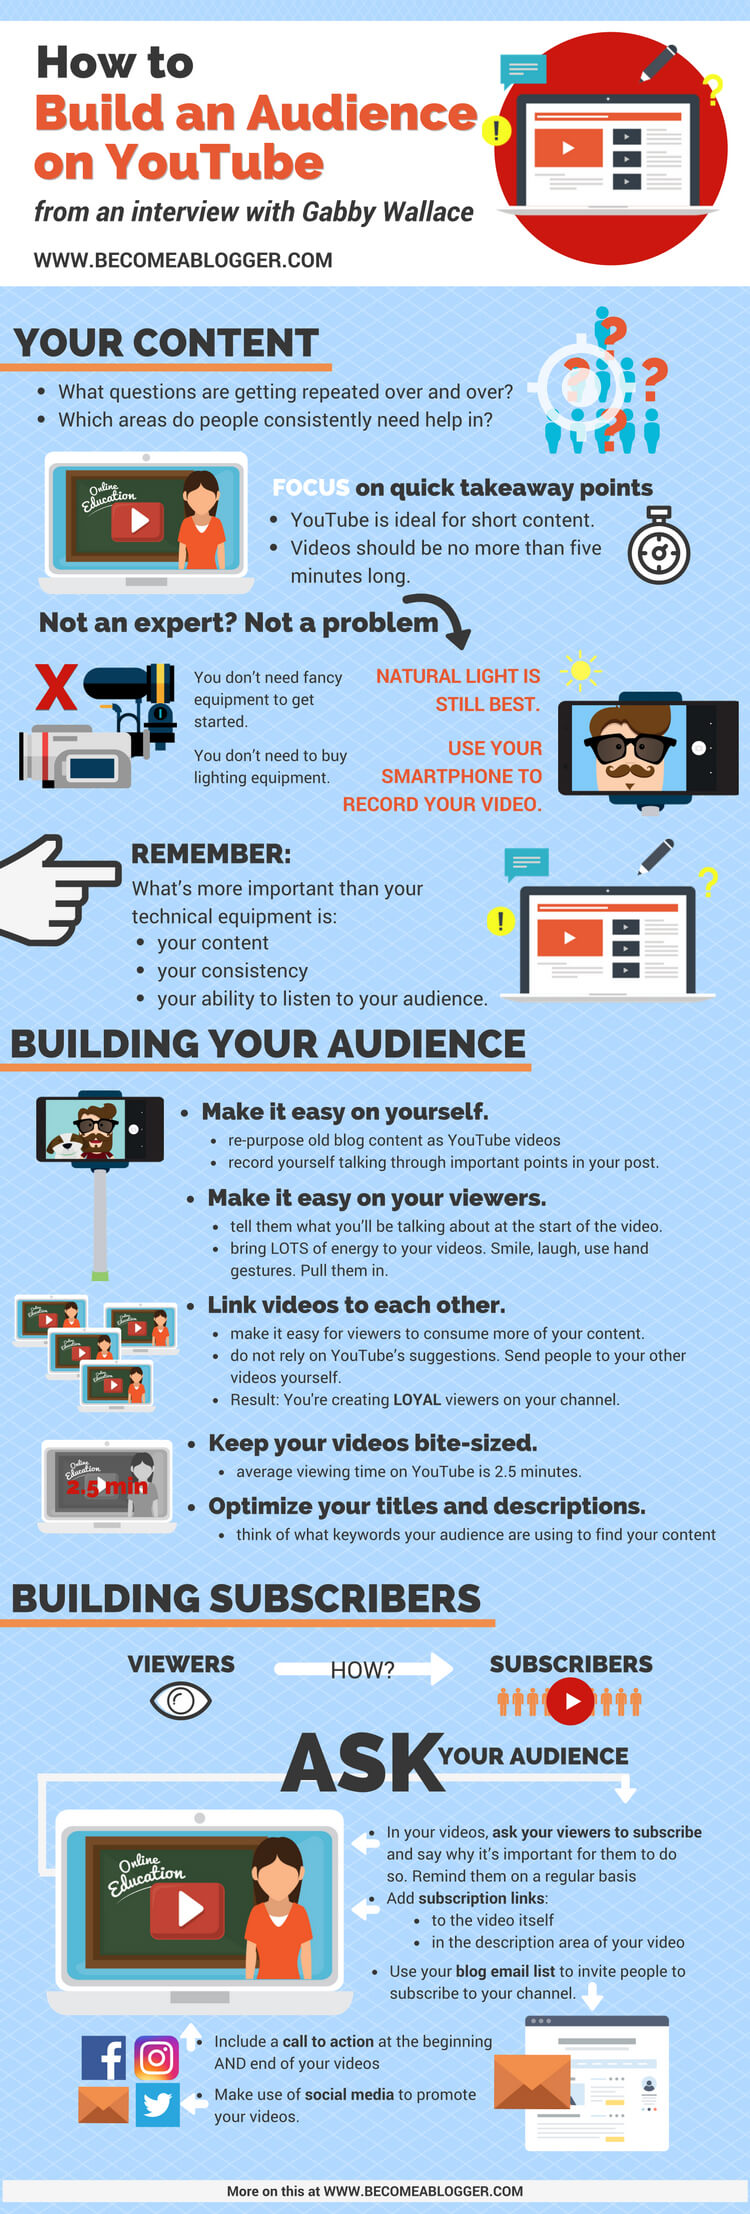 How to build an Audience on YouTube